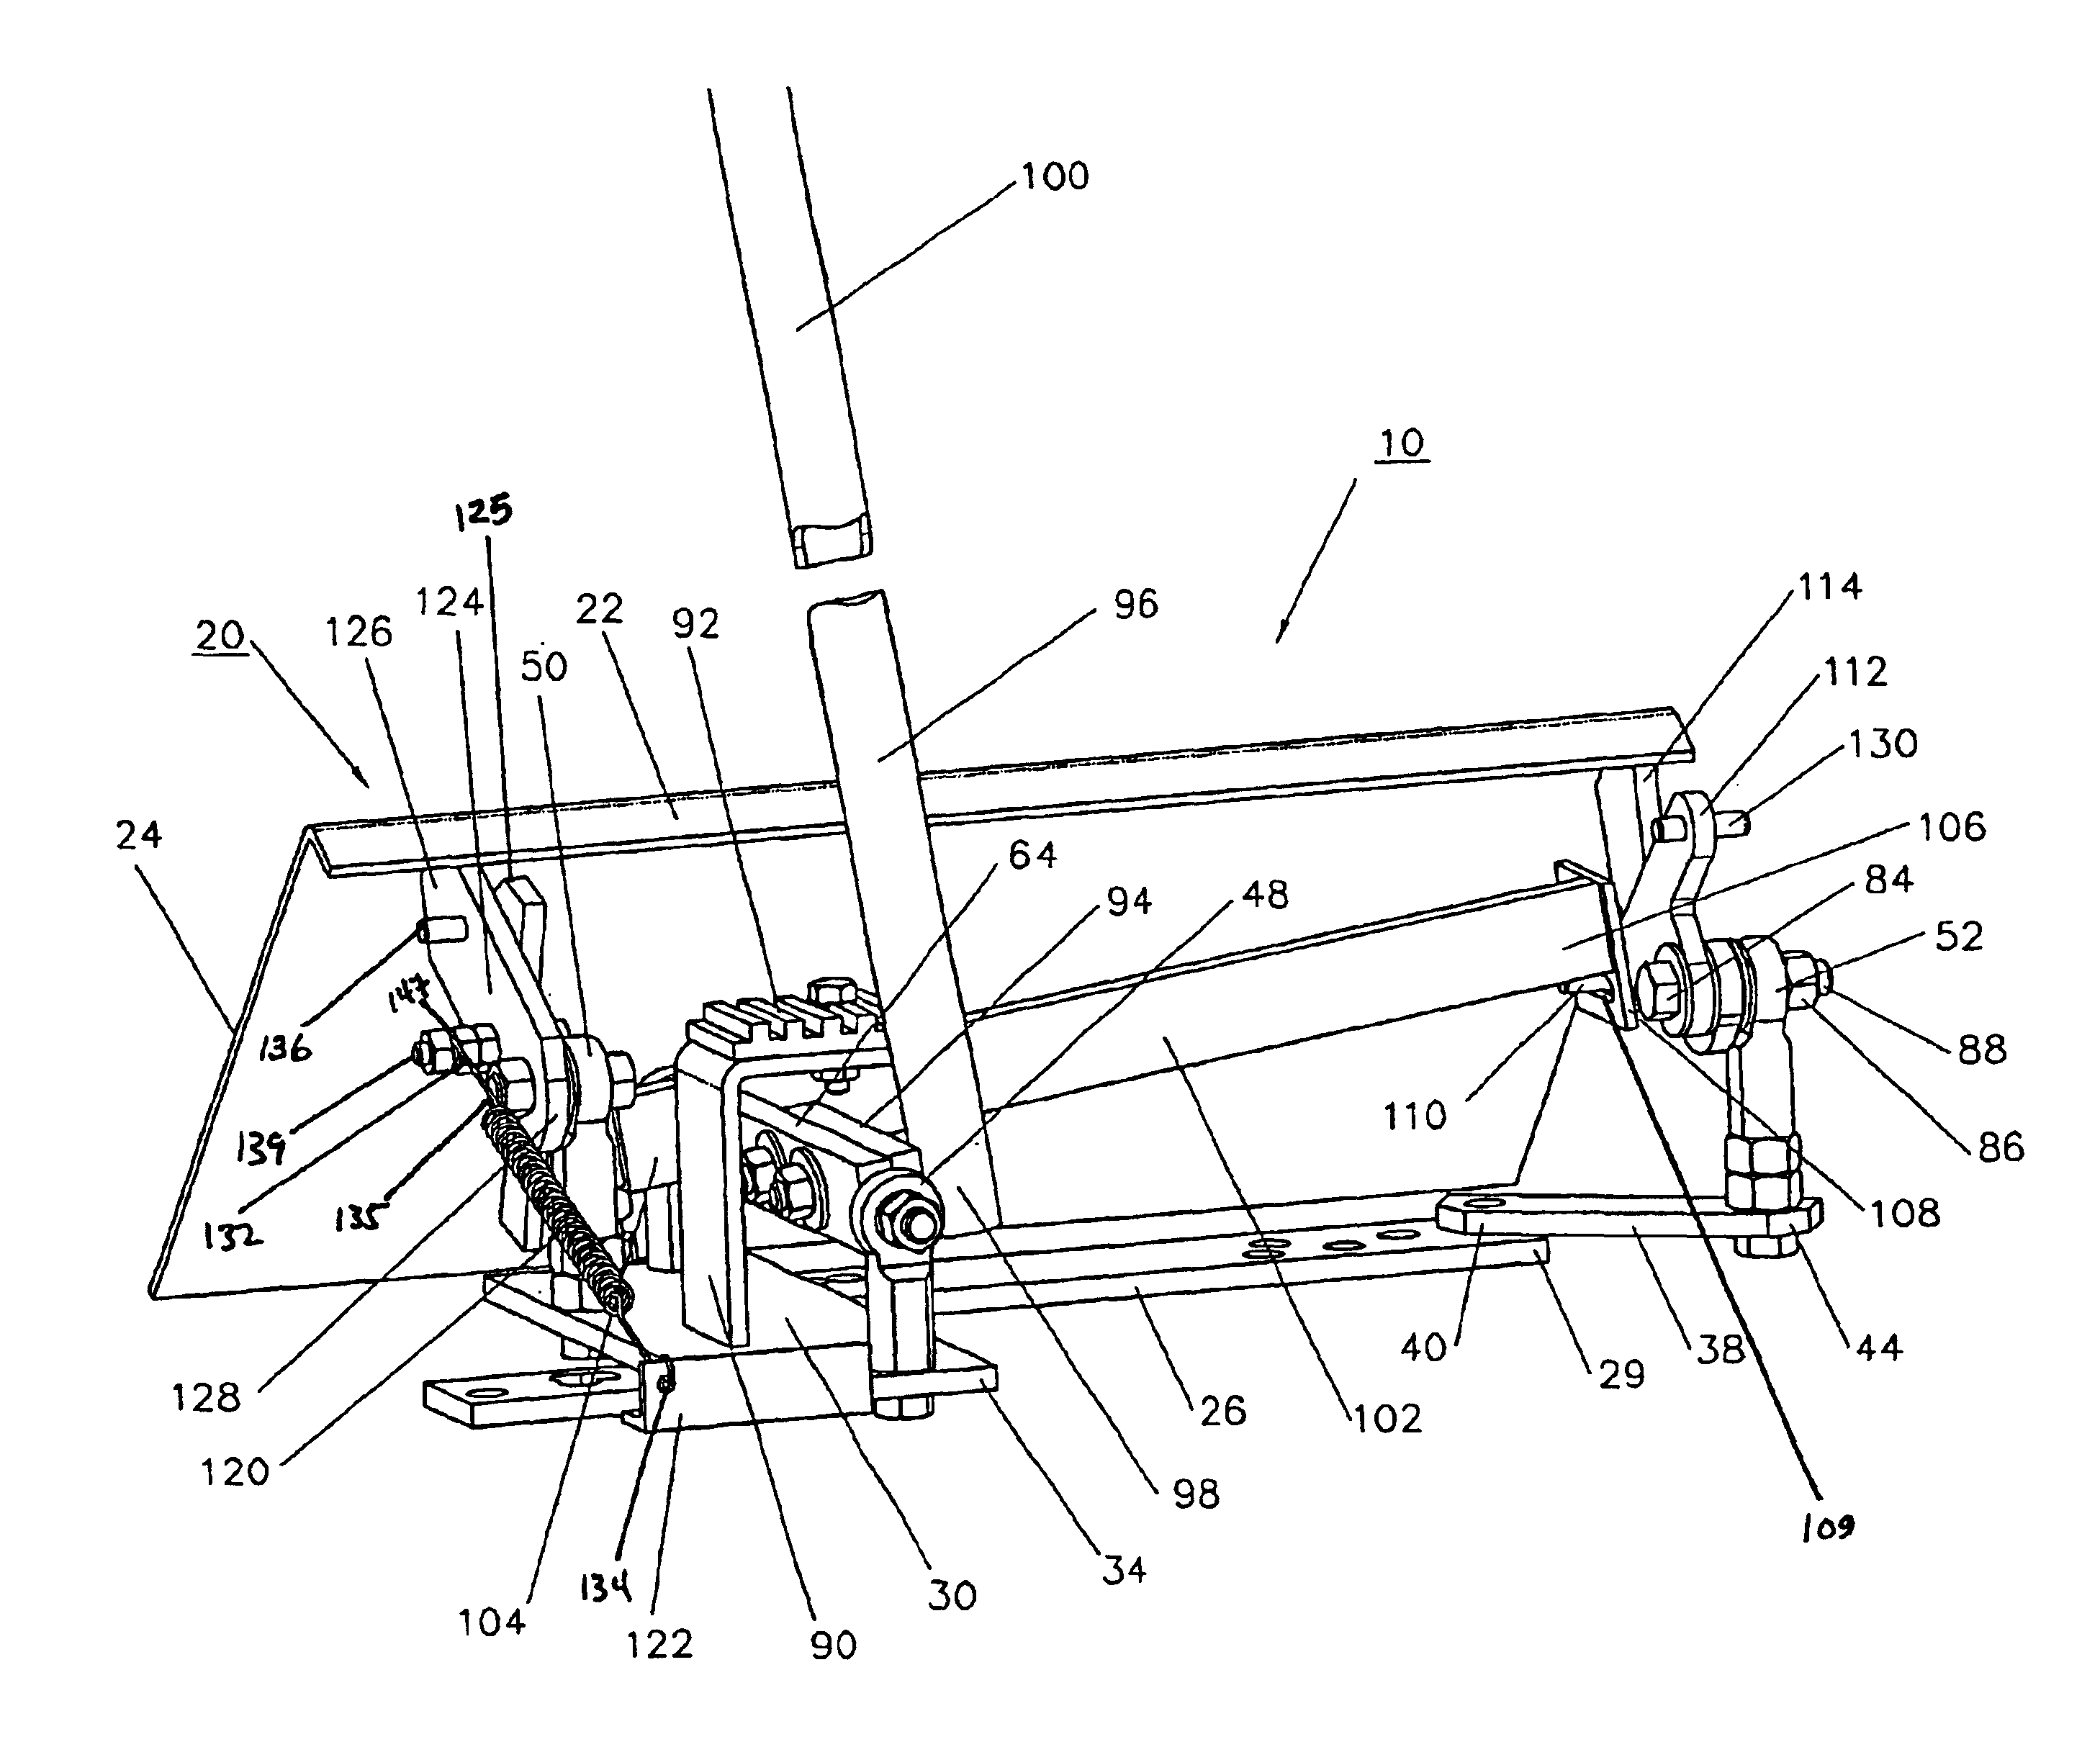 Lawn mower chute opening apparatus and method